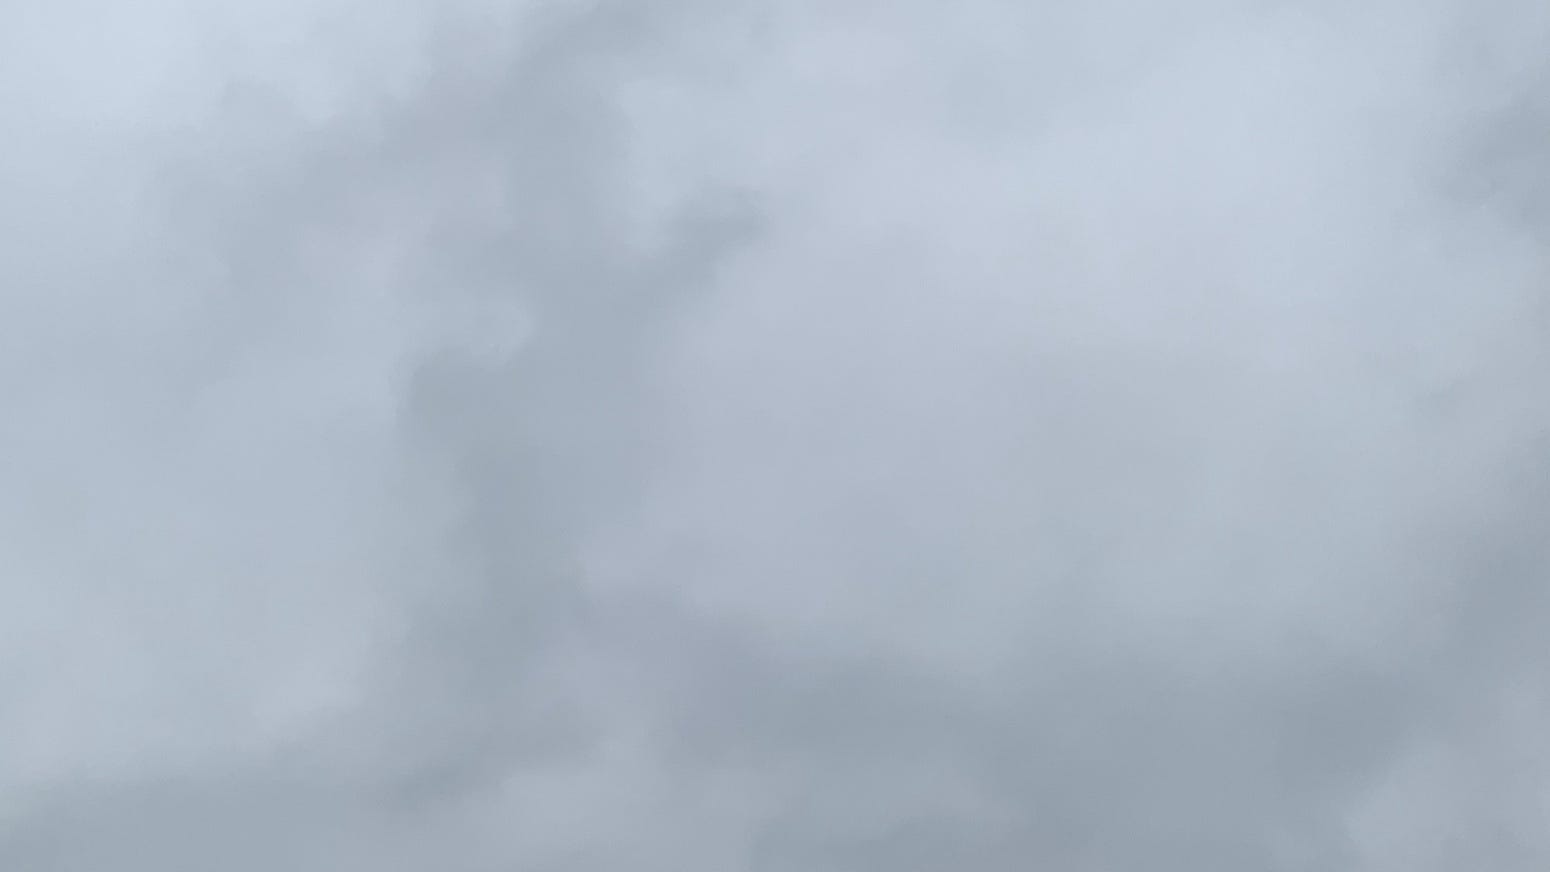 A picture of a medium-gray cloudy sky